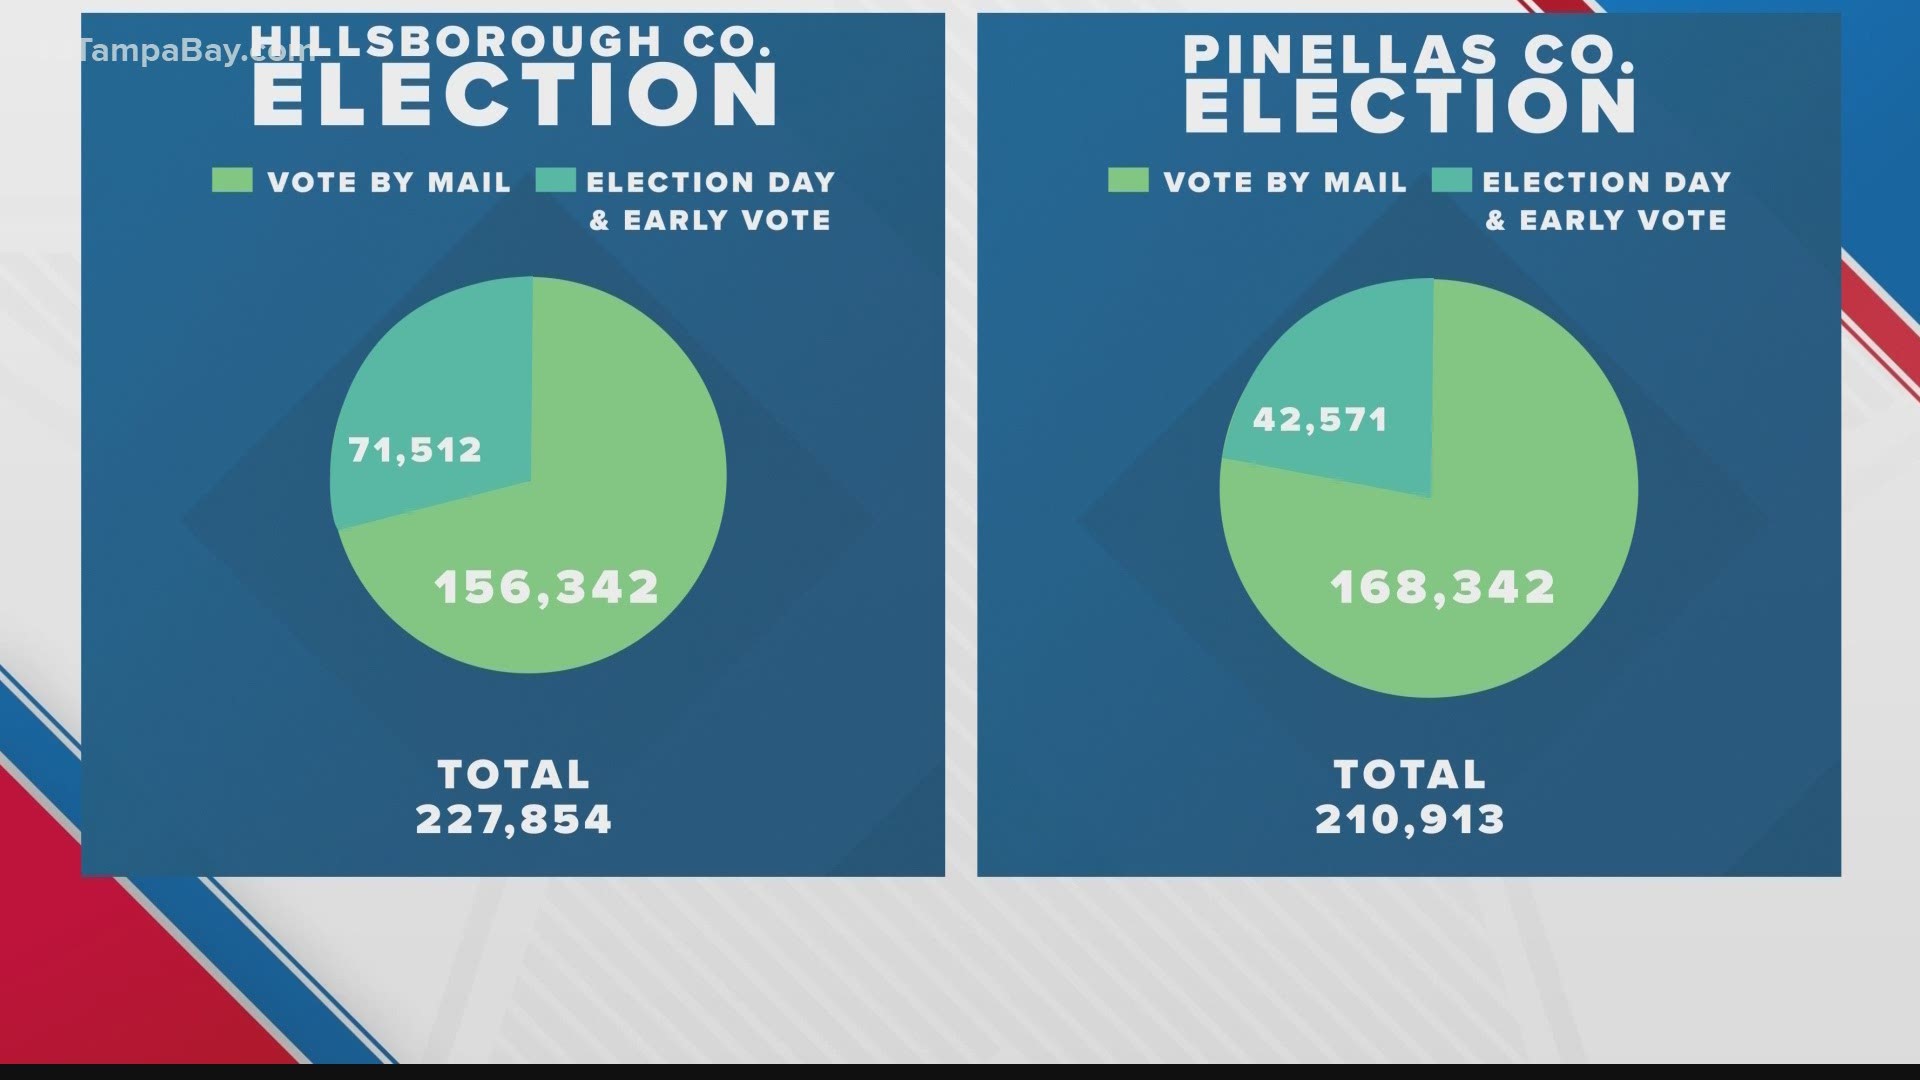 More voters turned in mail-in ballots for the August primary, increasing turnout despite fewer people voting in person.